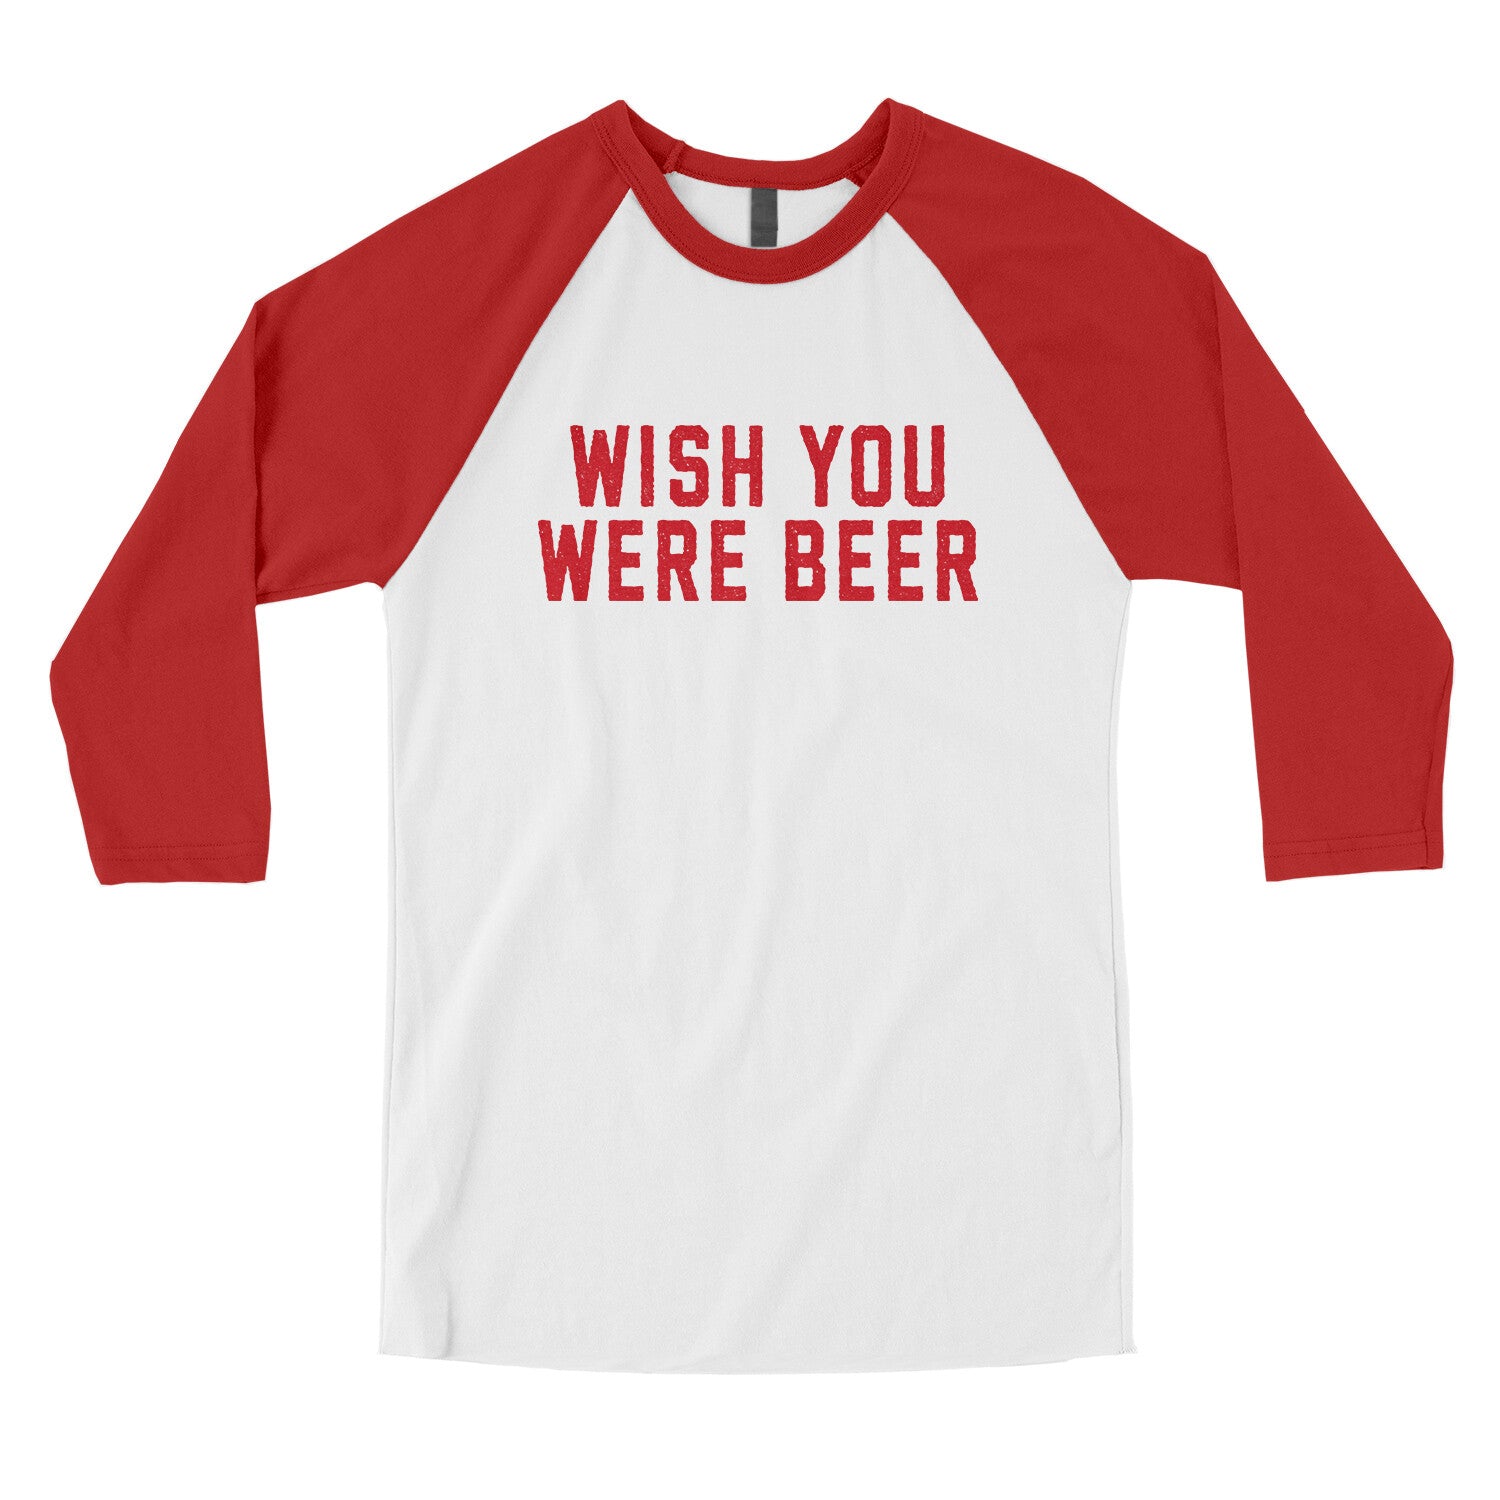 Wish You Were Beer in White with Red Color